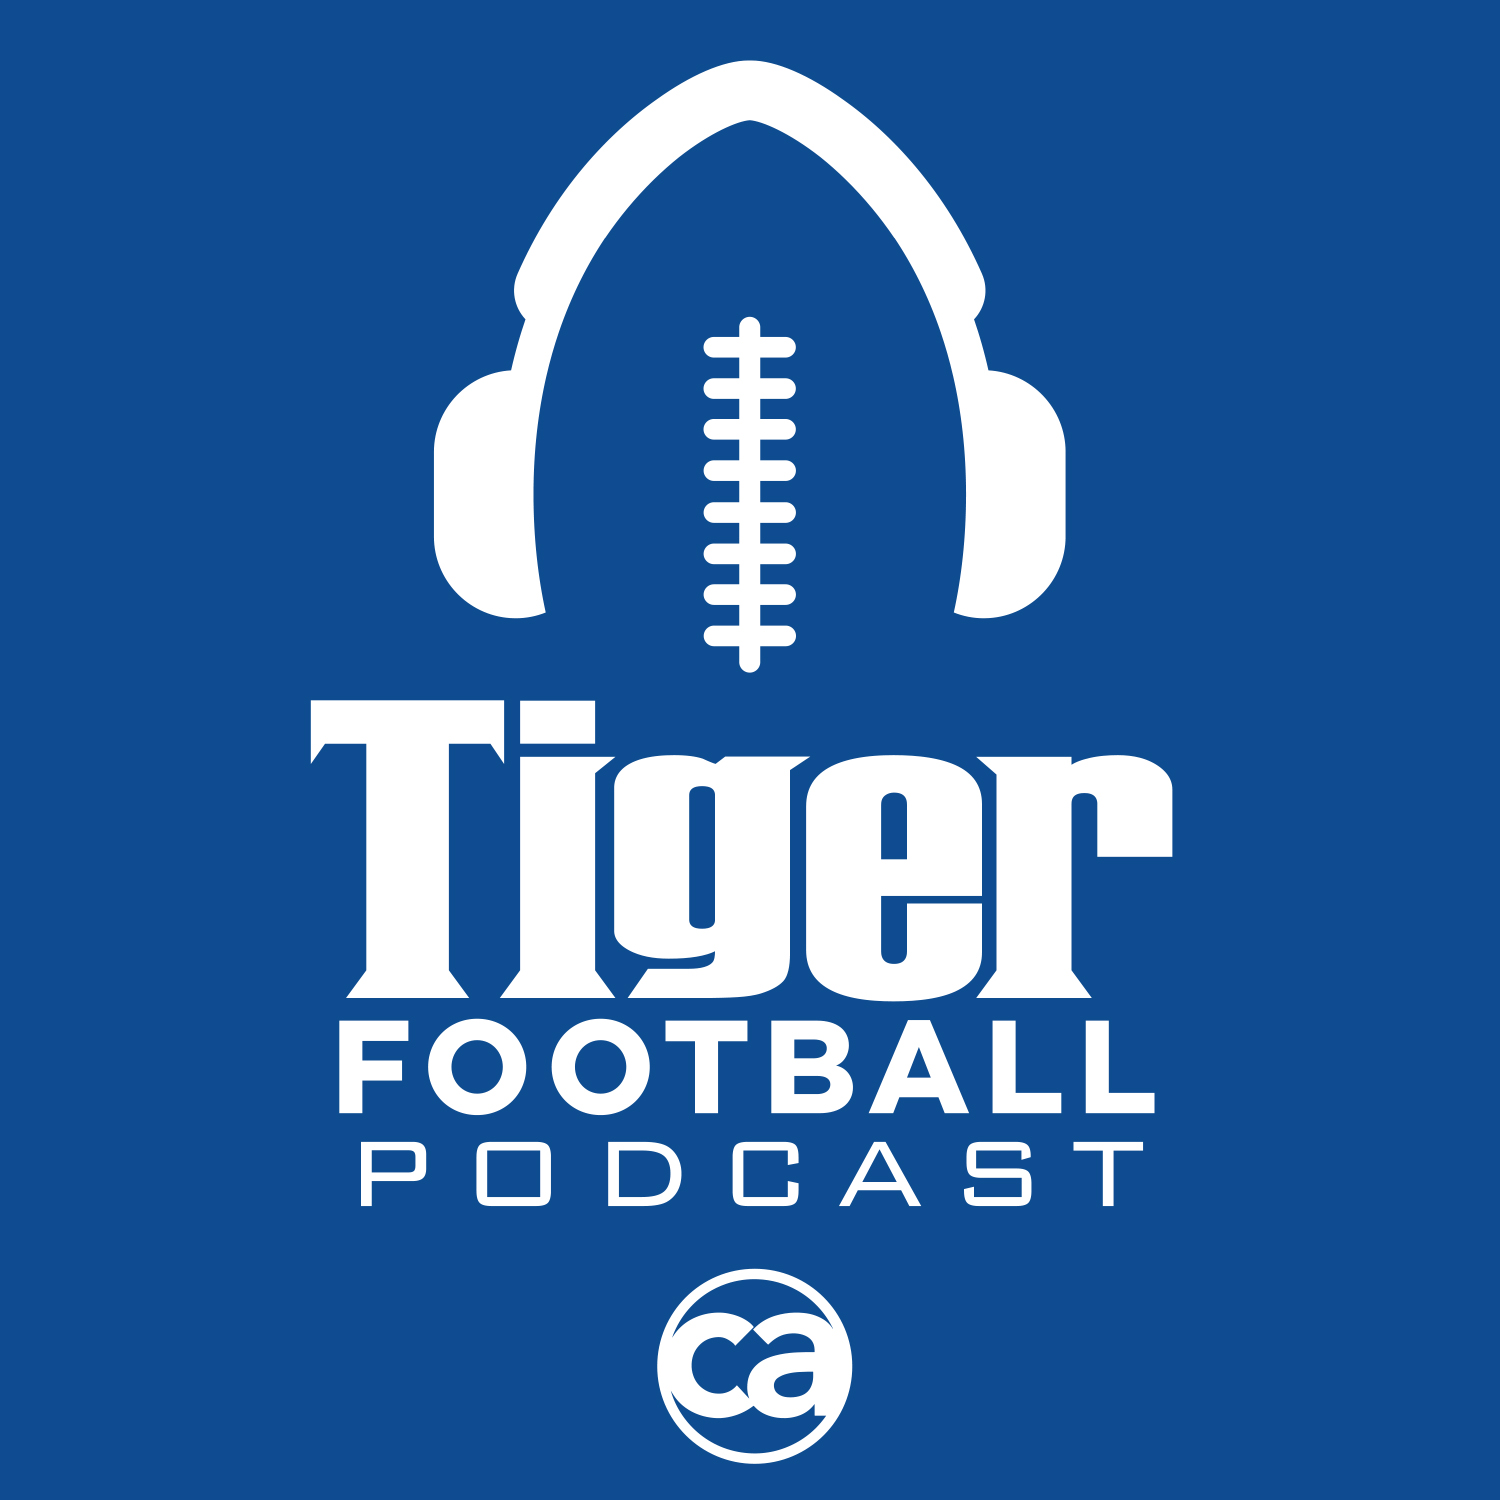 Tiger Football Podcast: Brady White proved he can carry Memphis to victory